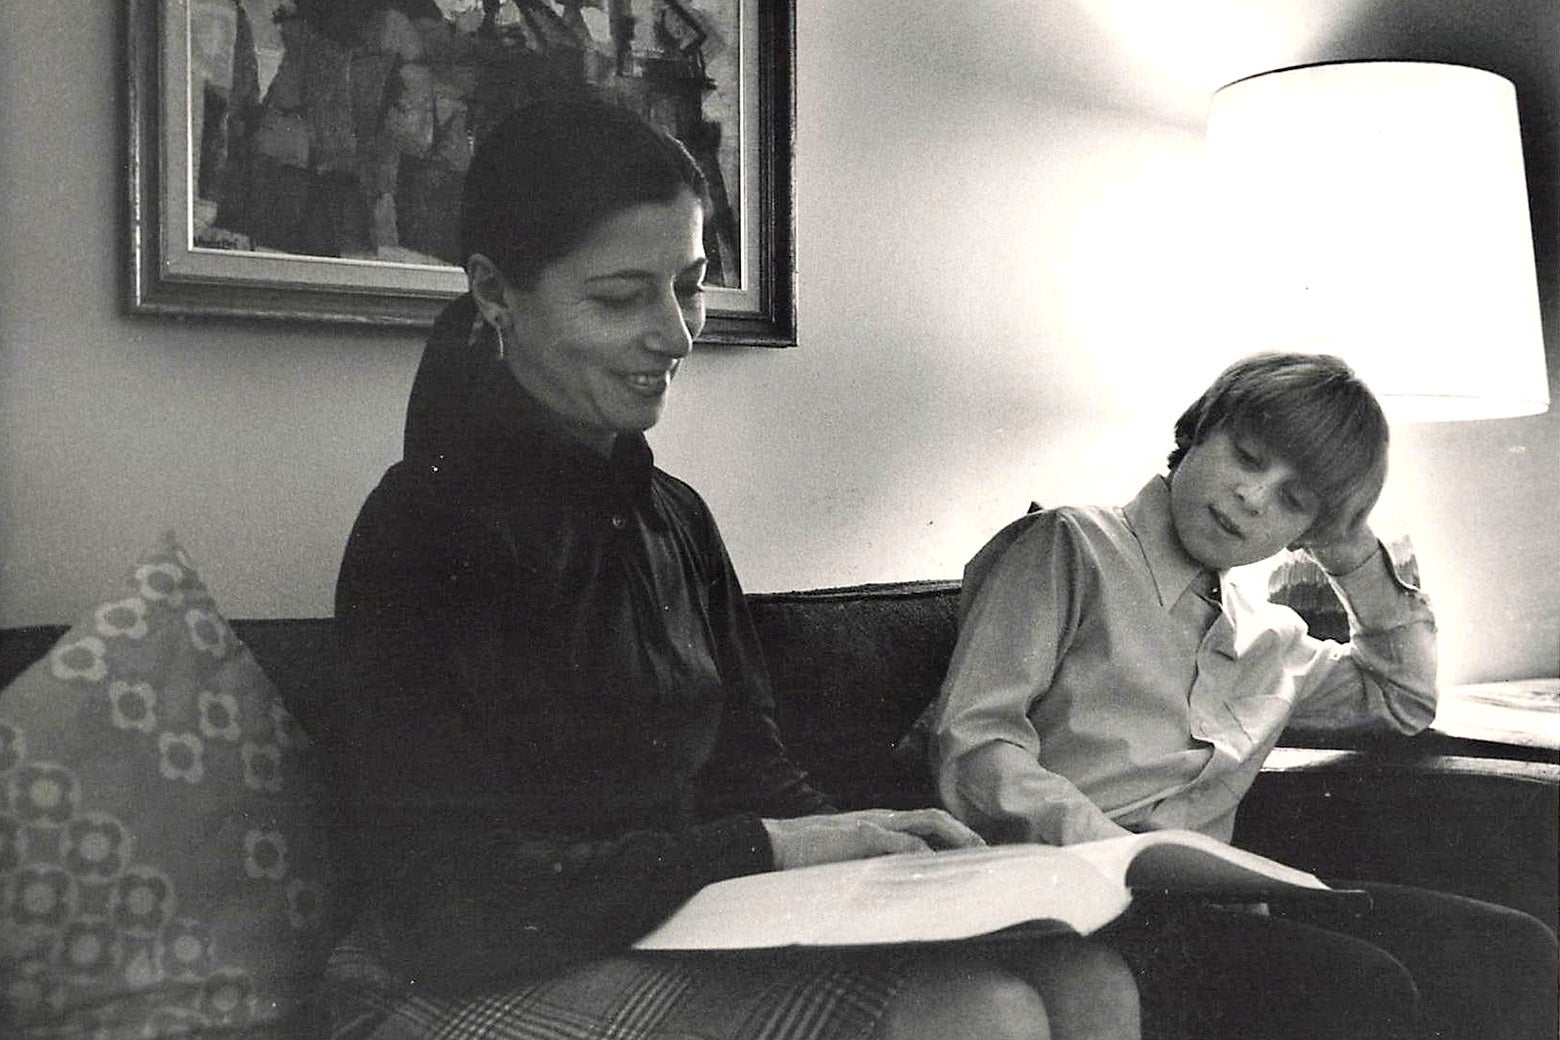 A black-and-white photo in which RBG sits on the couch with a book open next to her young son.